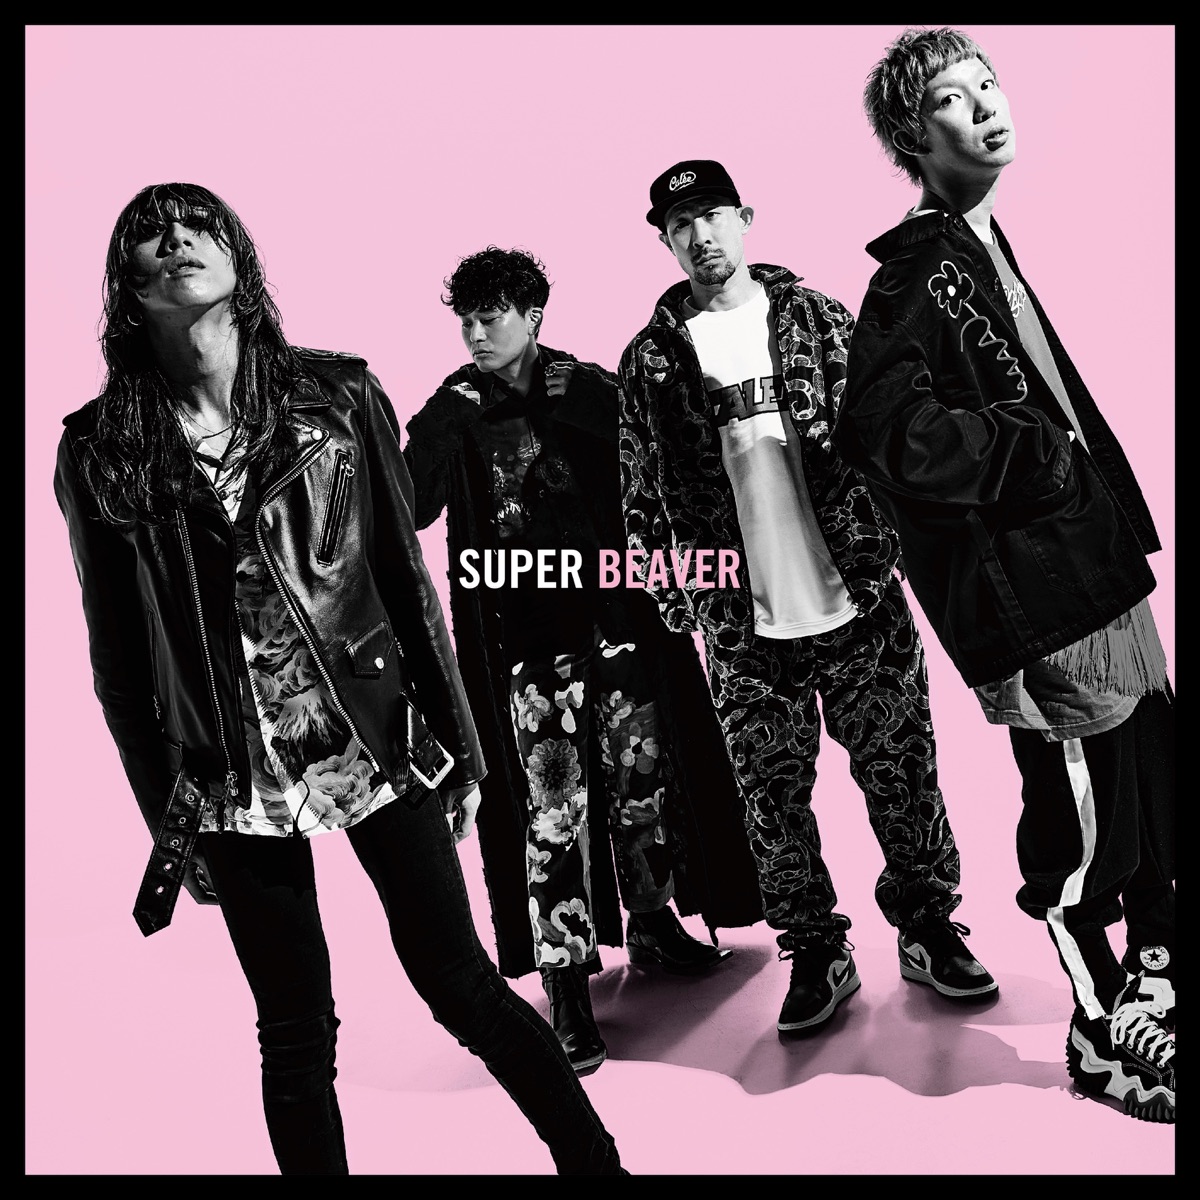 Cover art for『SUPER BEAVER - ひたむき』from the release『Hitamuki